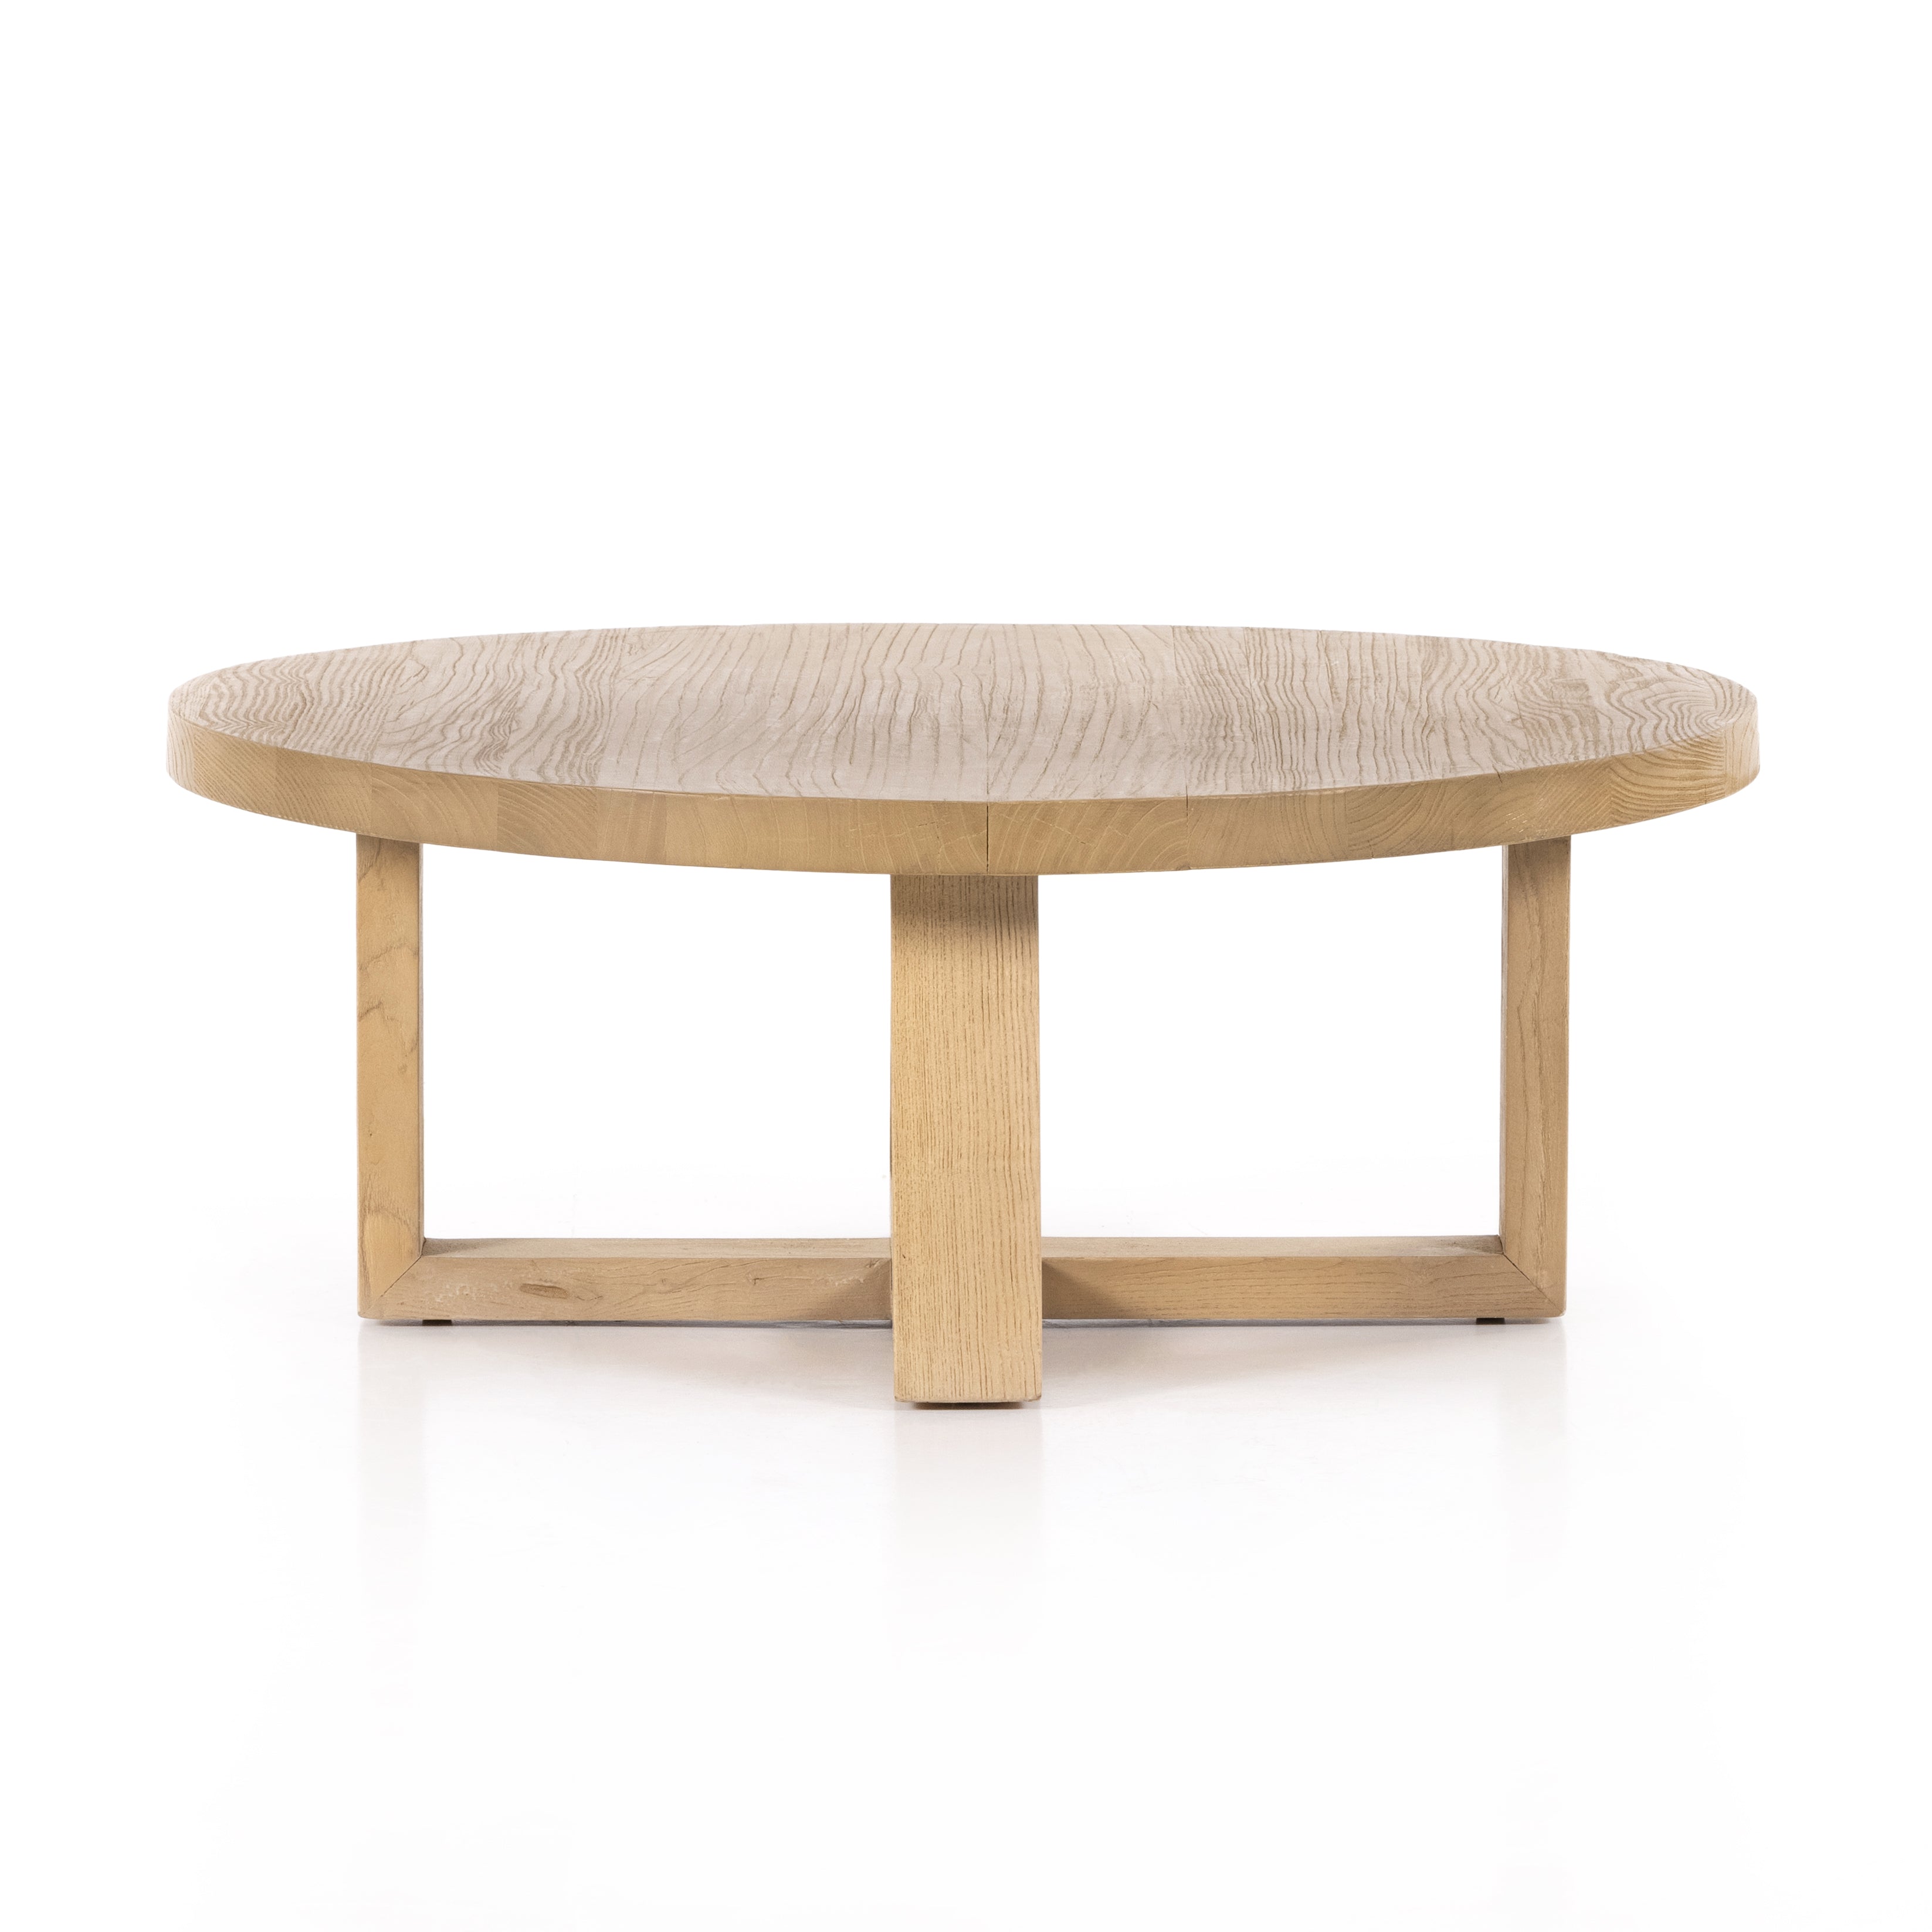 Made from solid natural nettlewood, an open cross-style base supports a thick, rounded tabletop finished with a soft hand on this Liad Coffee Table - Natural Nettlewood. We'd love to see this in your living room or lounge area!  Overall Dimensions: 39.25"w x 39.25"d x 15.00"h